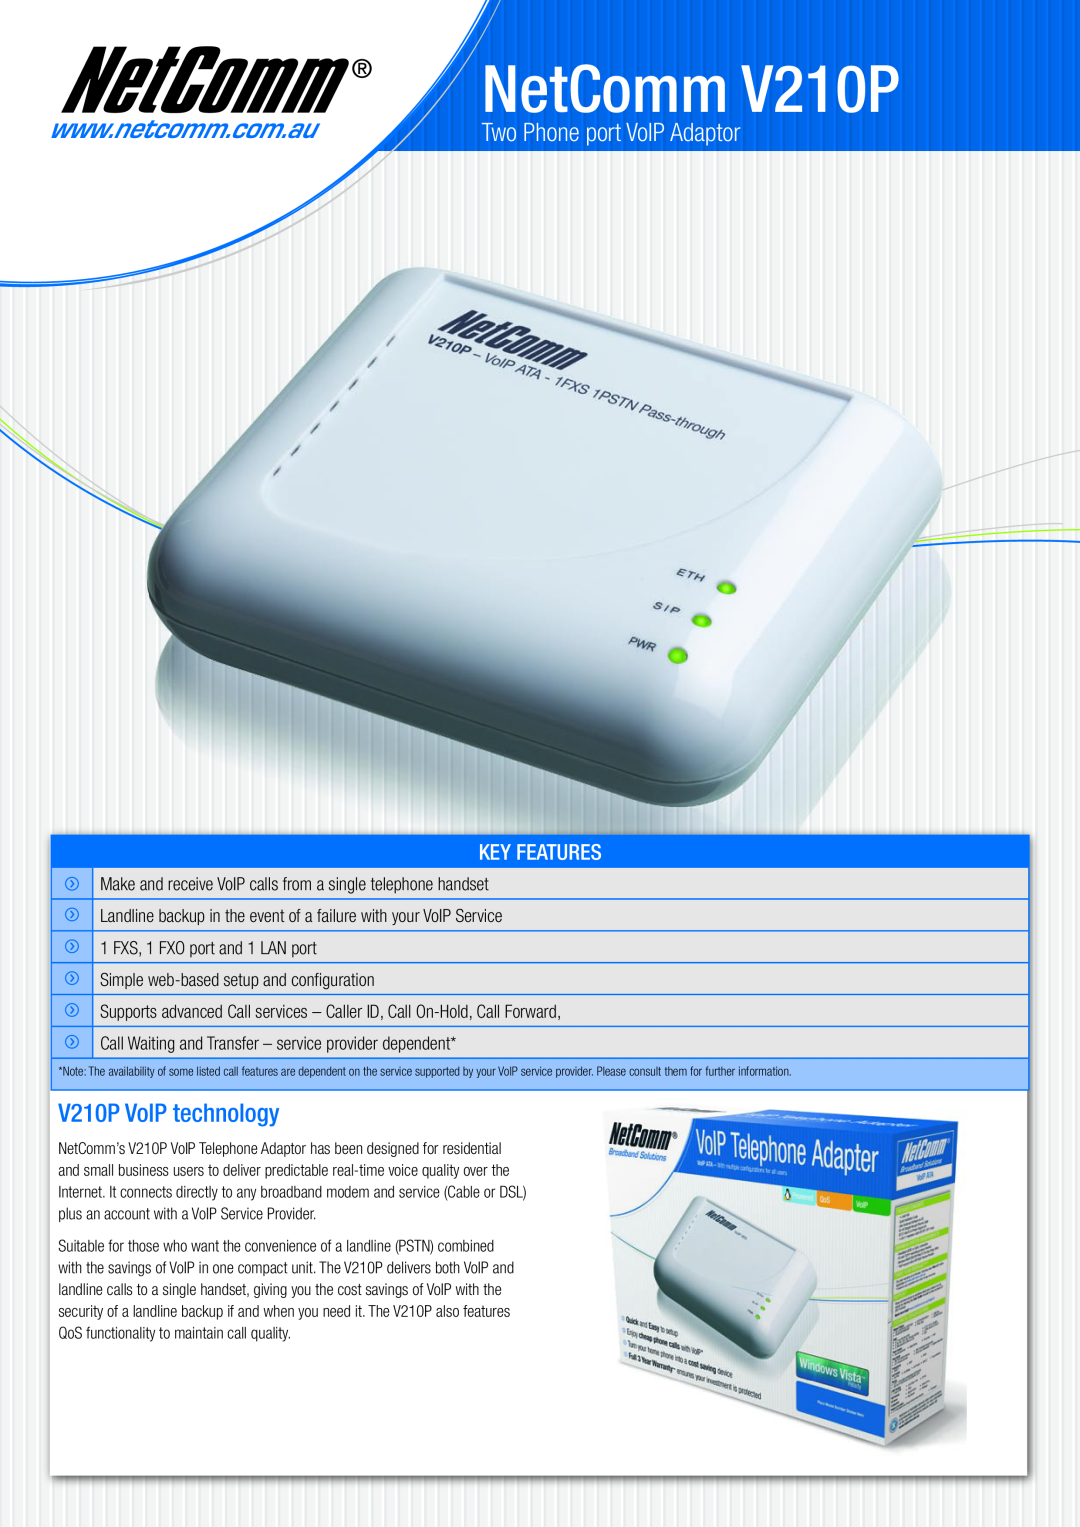 NetComm manual NetComm V210P, Two Phone port VoIP Adaptor, V210P VoIP technology, Key Features 